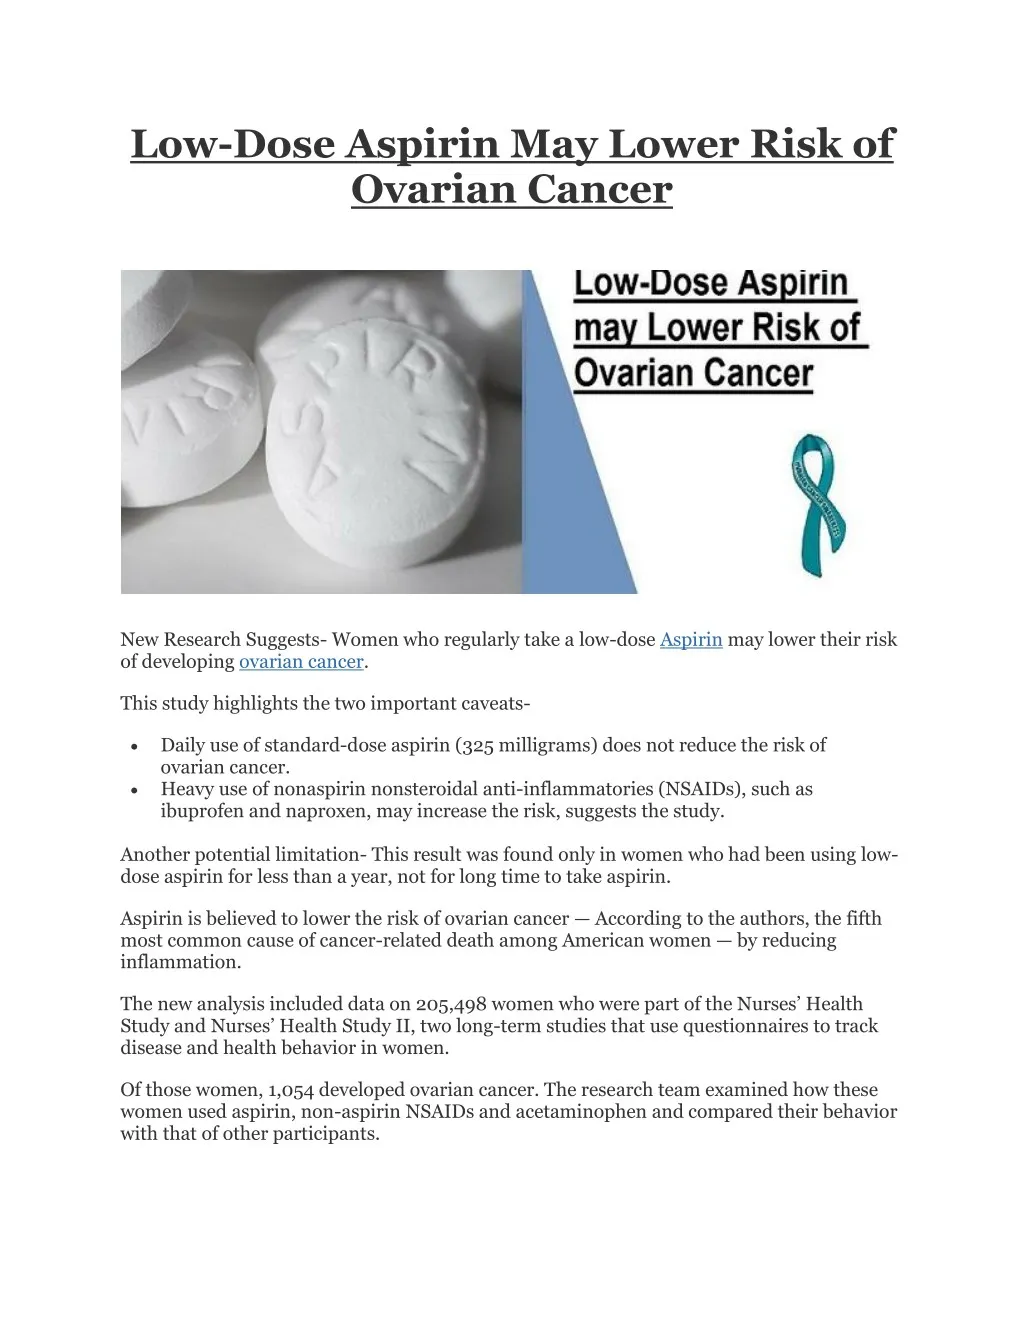 low dose aspirin may lower risk of ovarian cancer